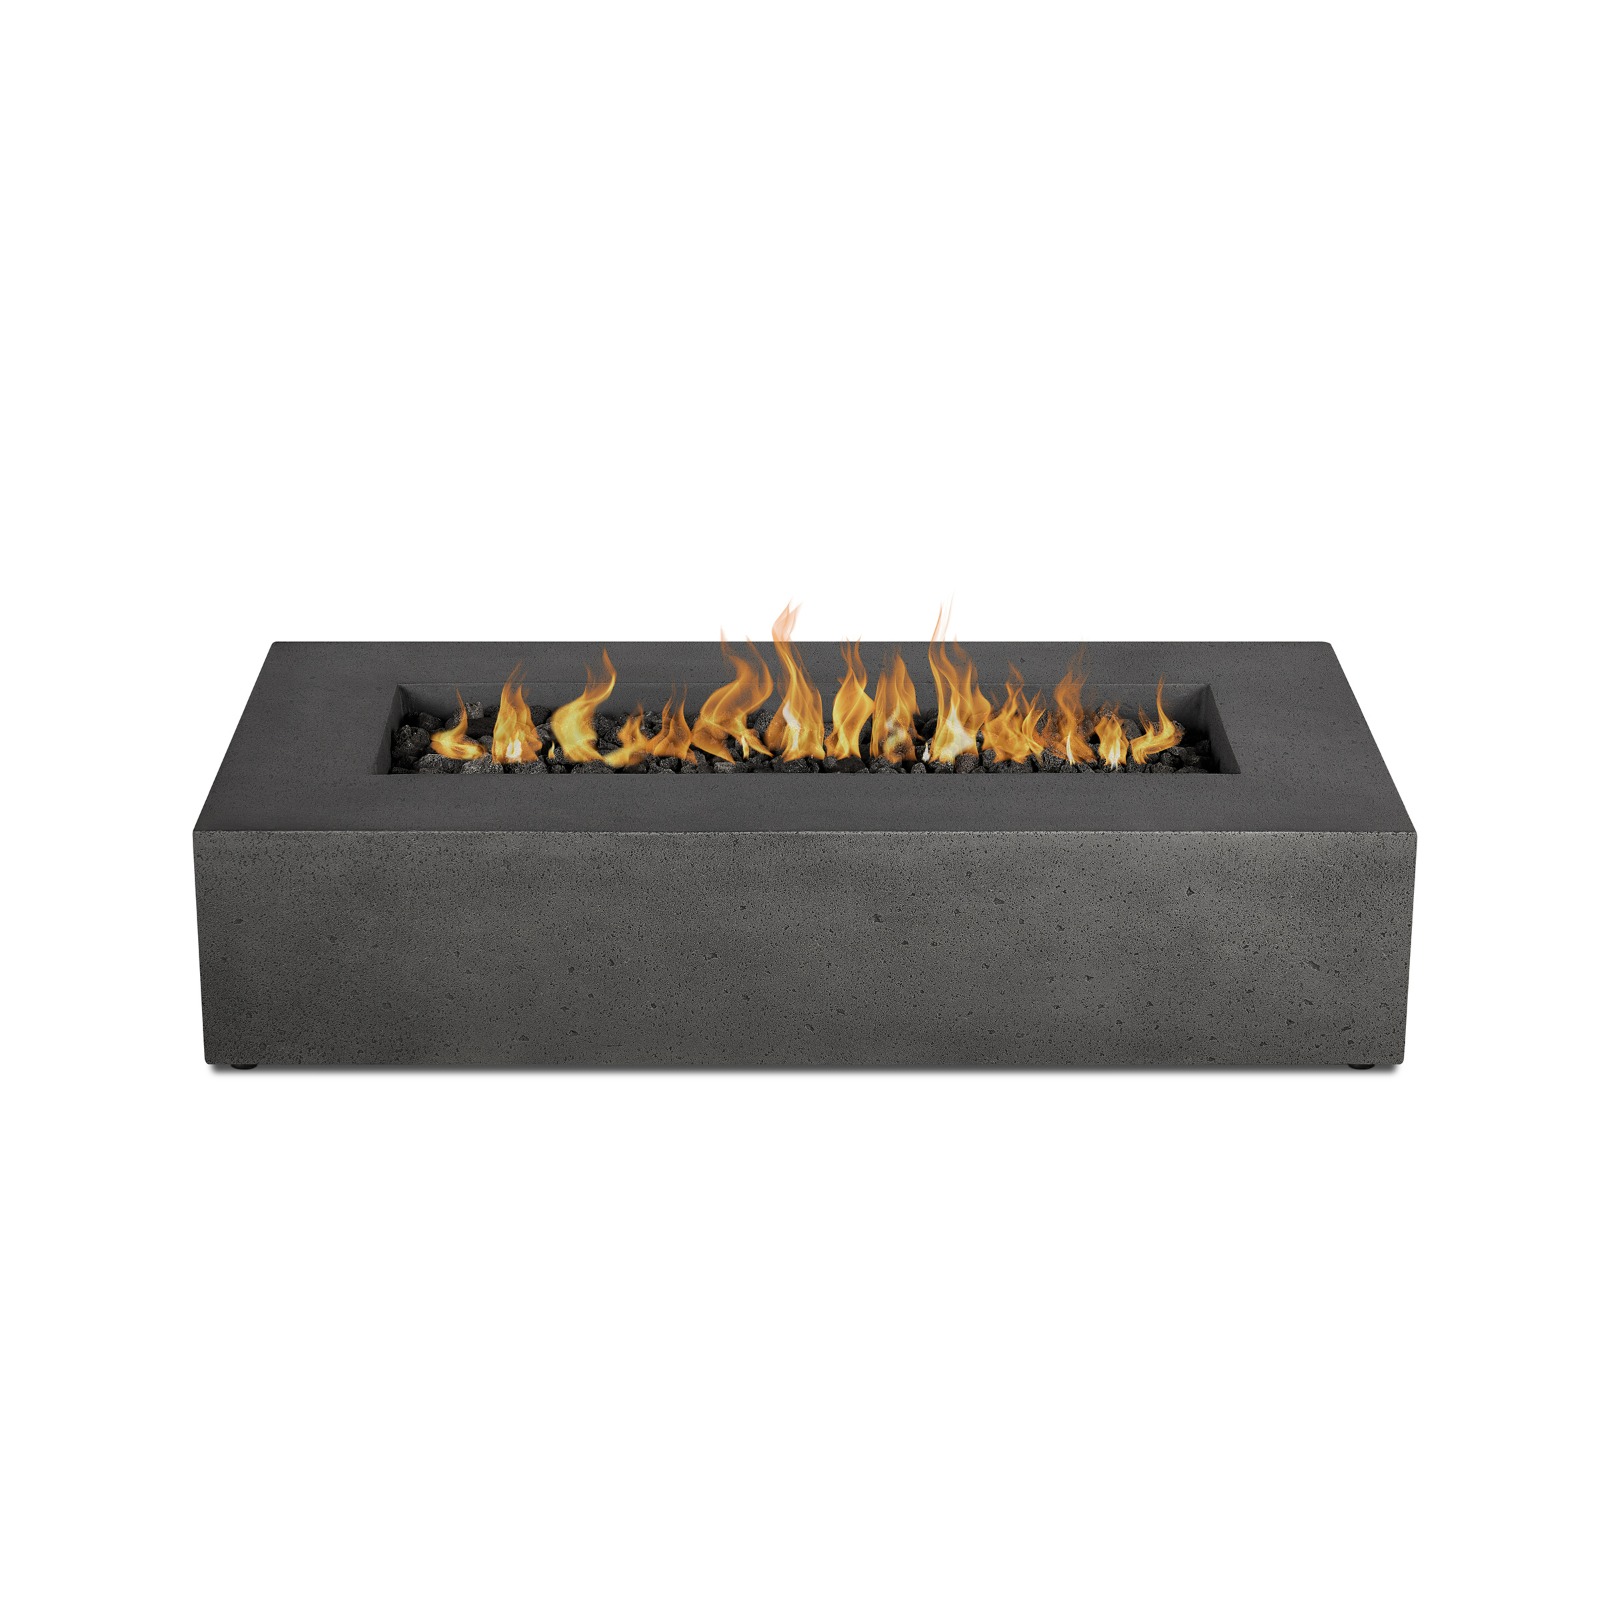 La Valle 56" Rectangle GFRC Outdoor Natural Gas or Propane Fire Pit Fireplace Fire Table for Backyard or Patio